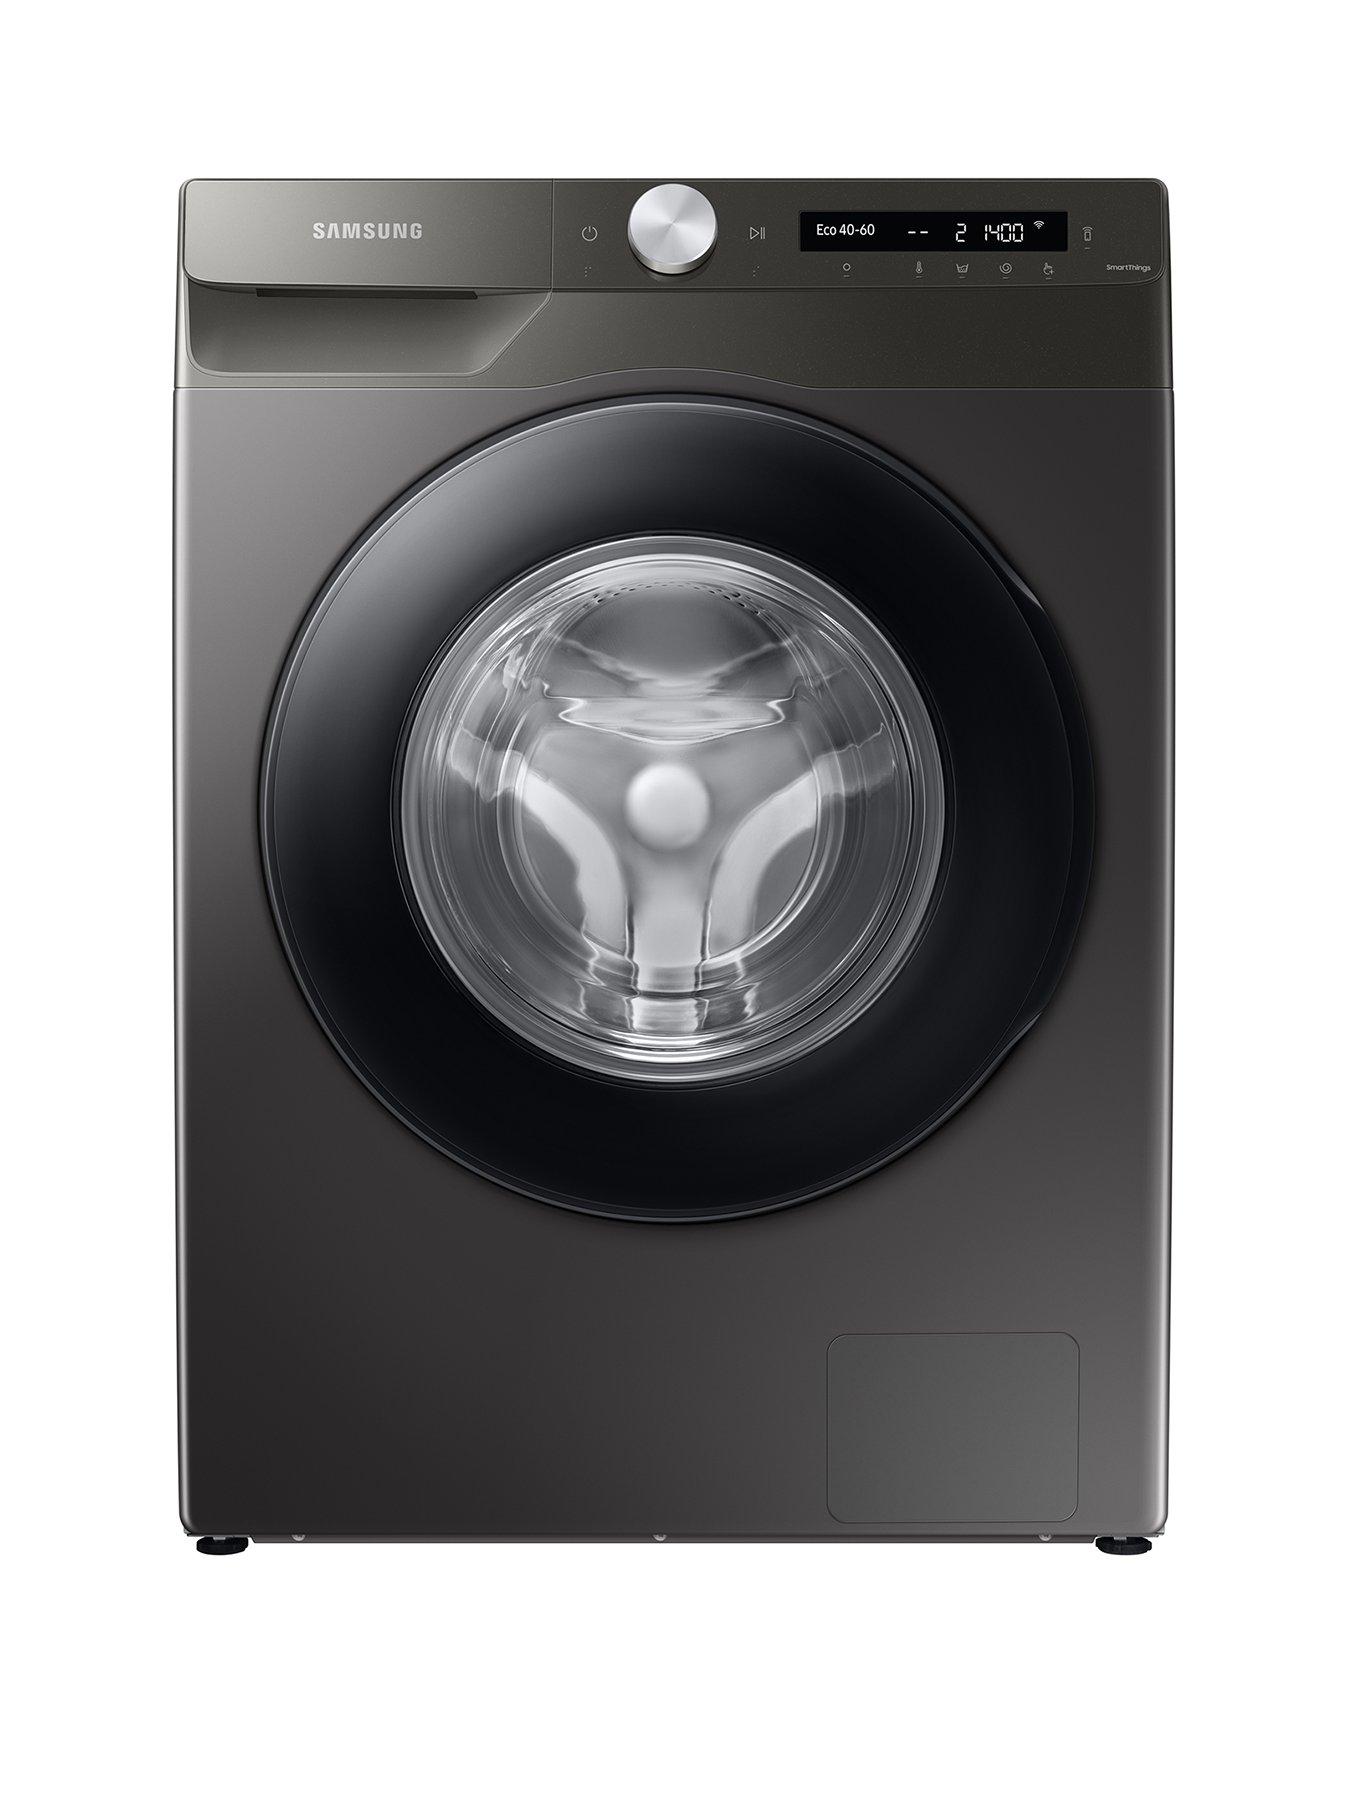 Samsung Series 5 Ww90T534DanS1 Auto Dose Washing Machine - 9Kg Load 1400Rpm Spin A Rated - Graphite